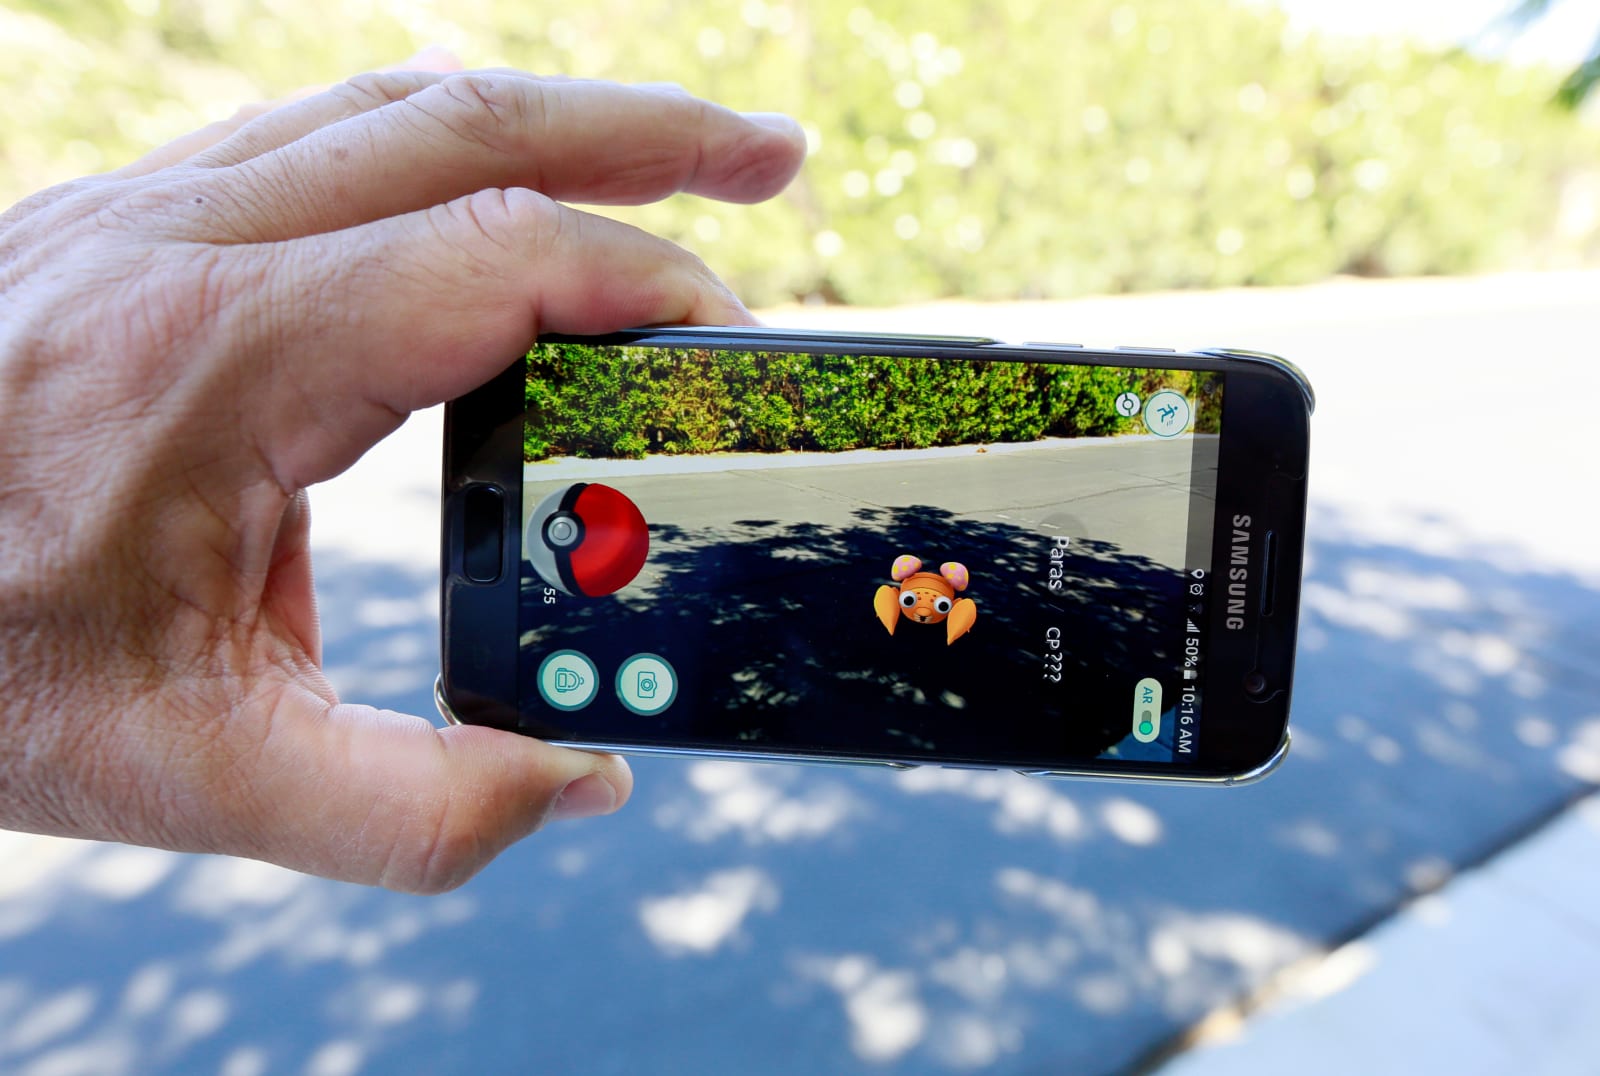 T-Mobile is giving away free 'Pokémon Go' data for a year